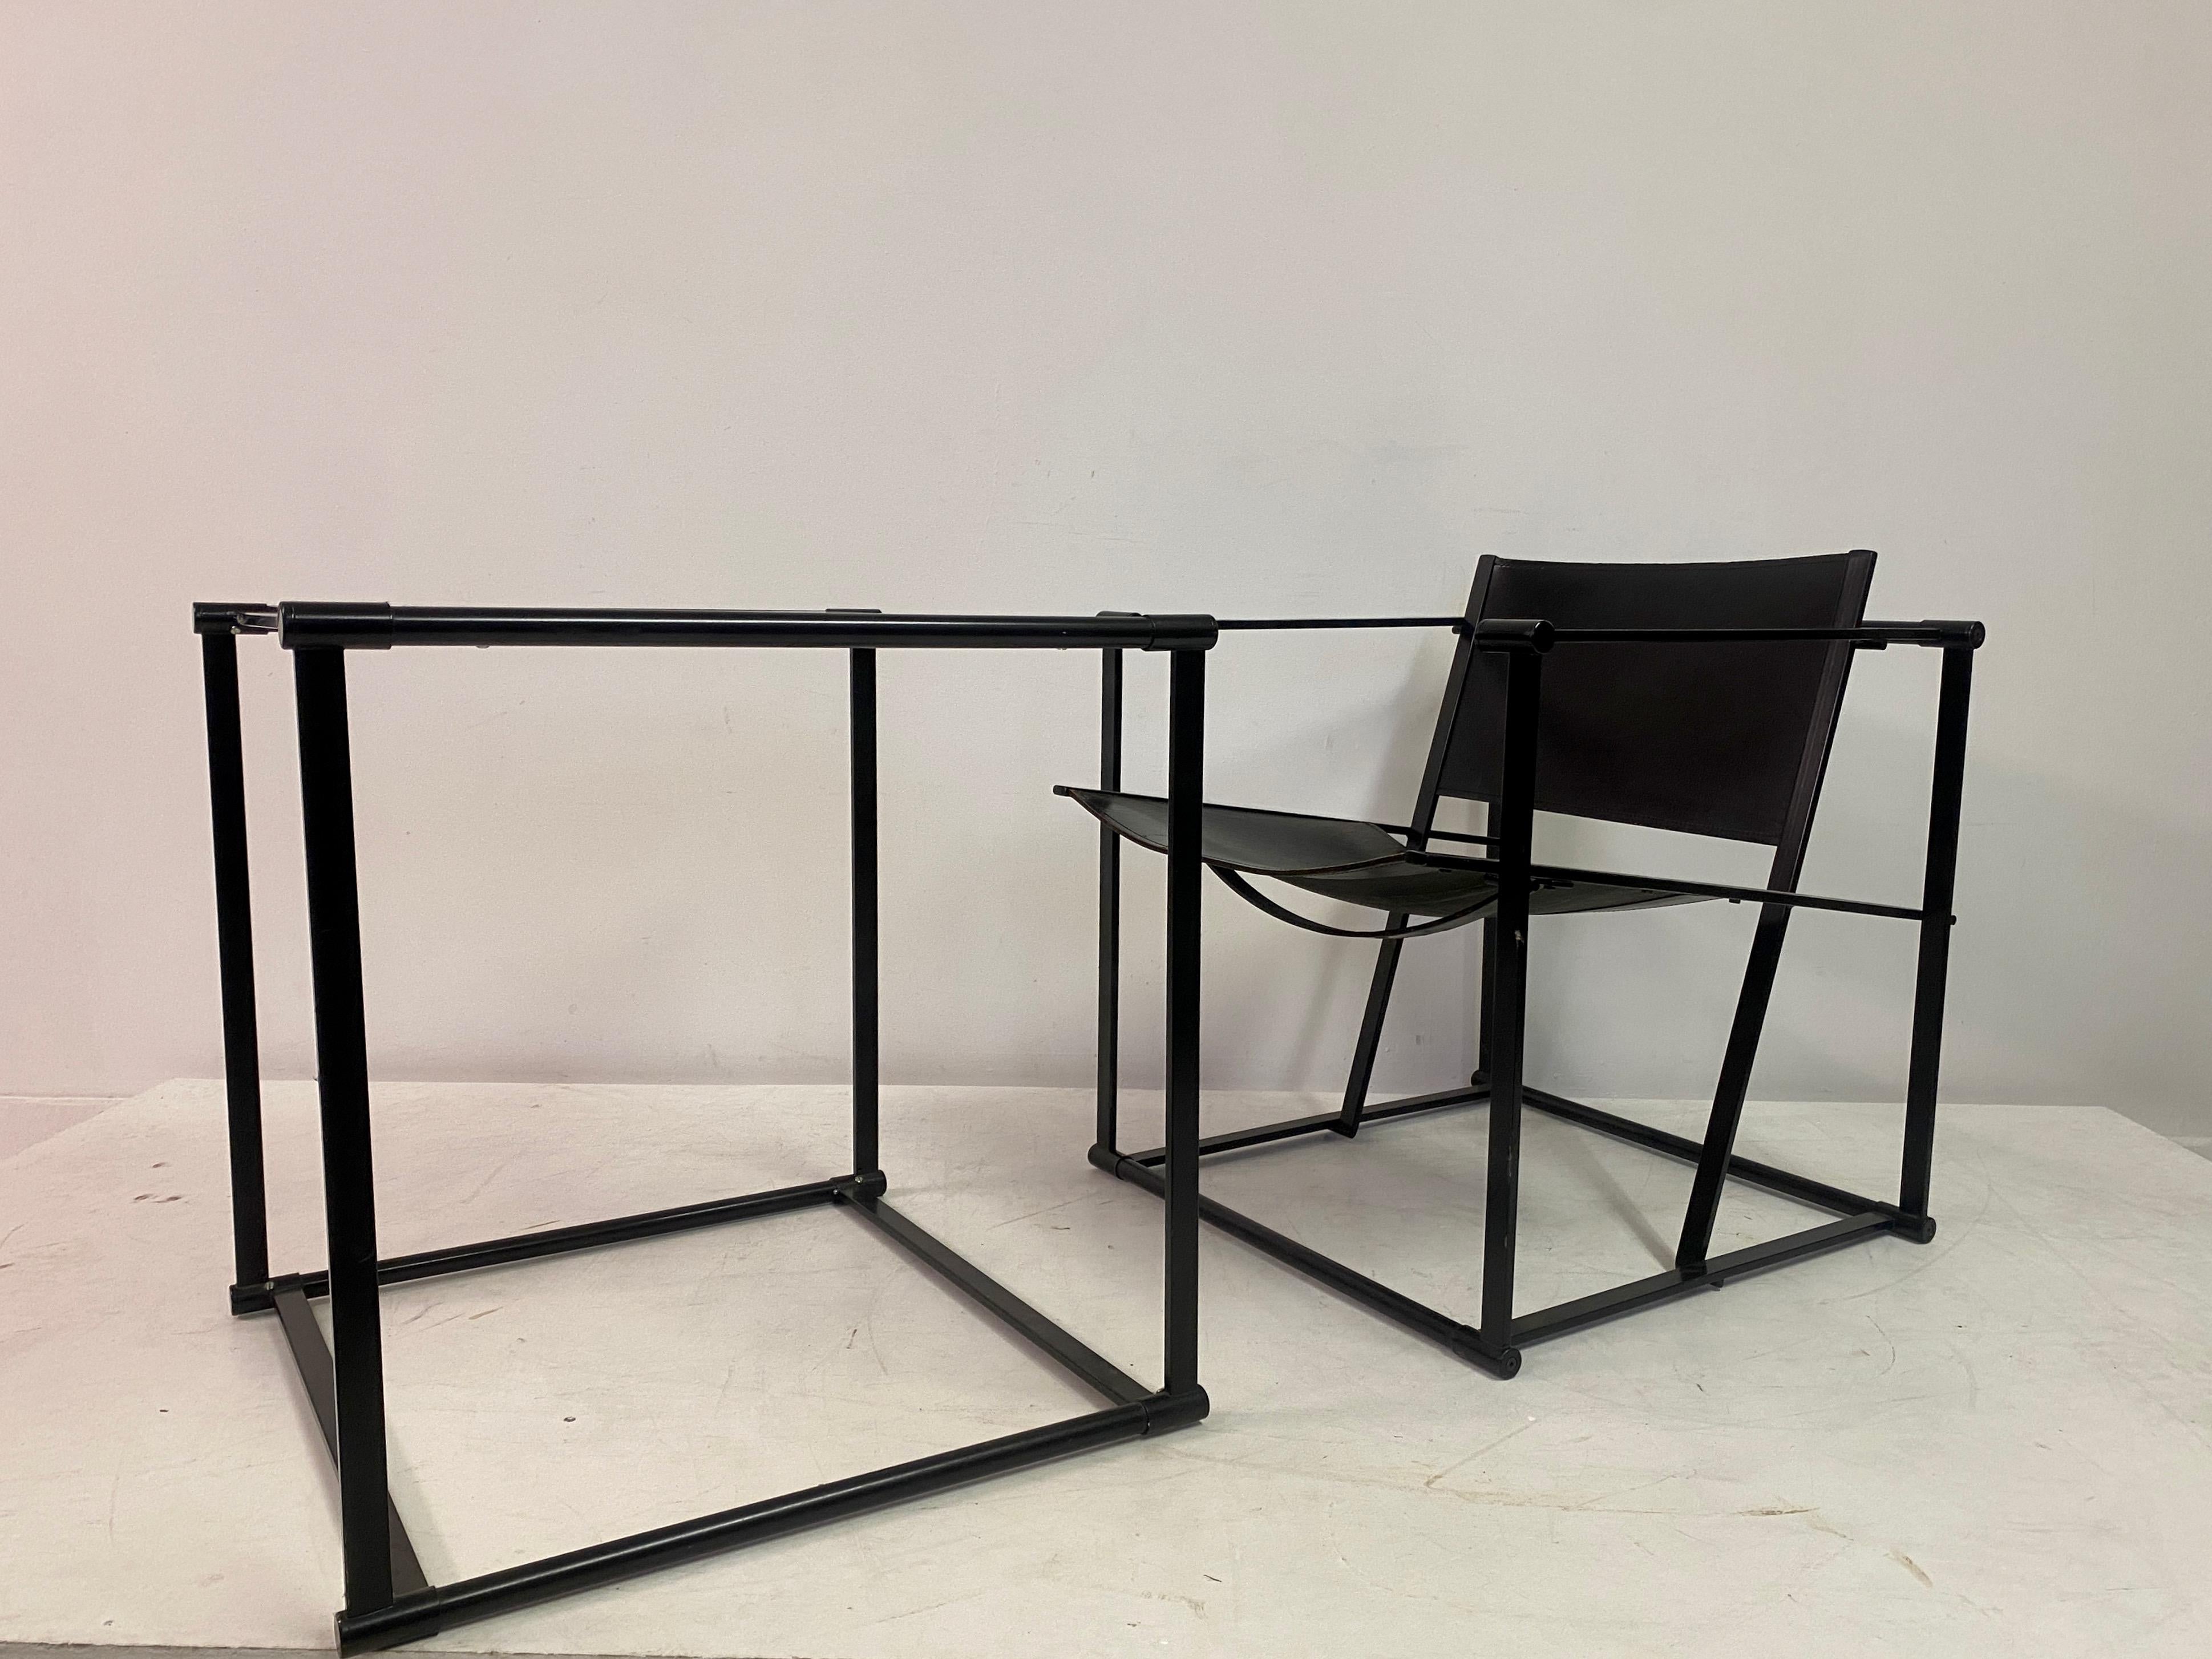 Black Leather FM62 Chair And Table For Pastoe by Radboud van Beekum In Good Condition For Sale In London, London